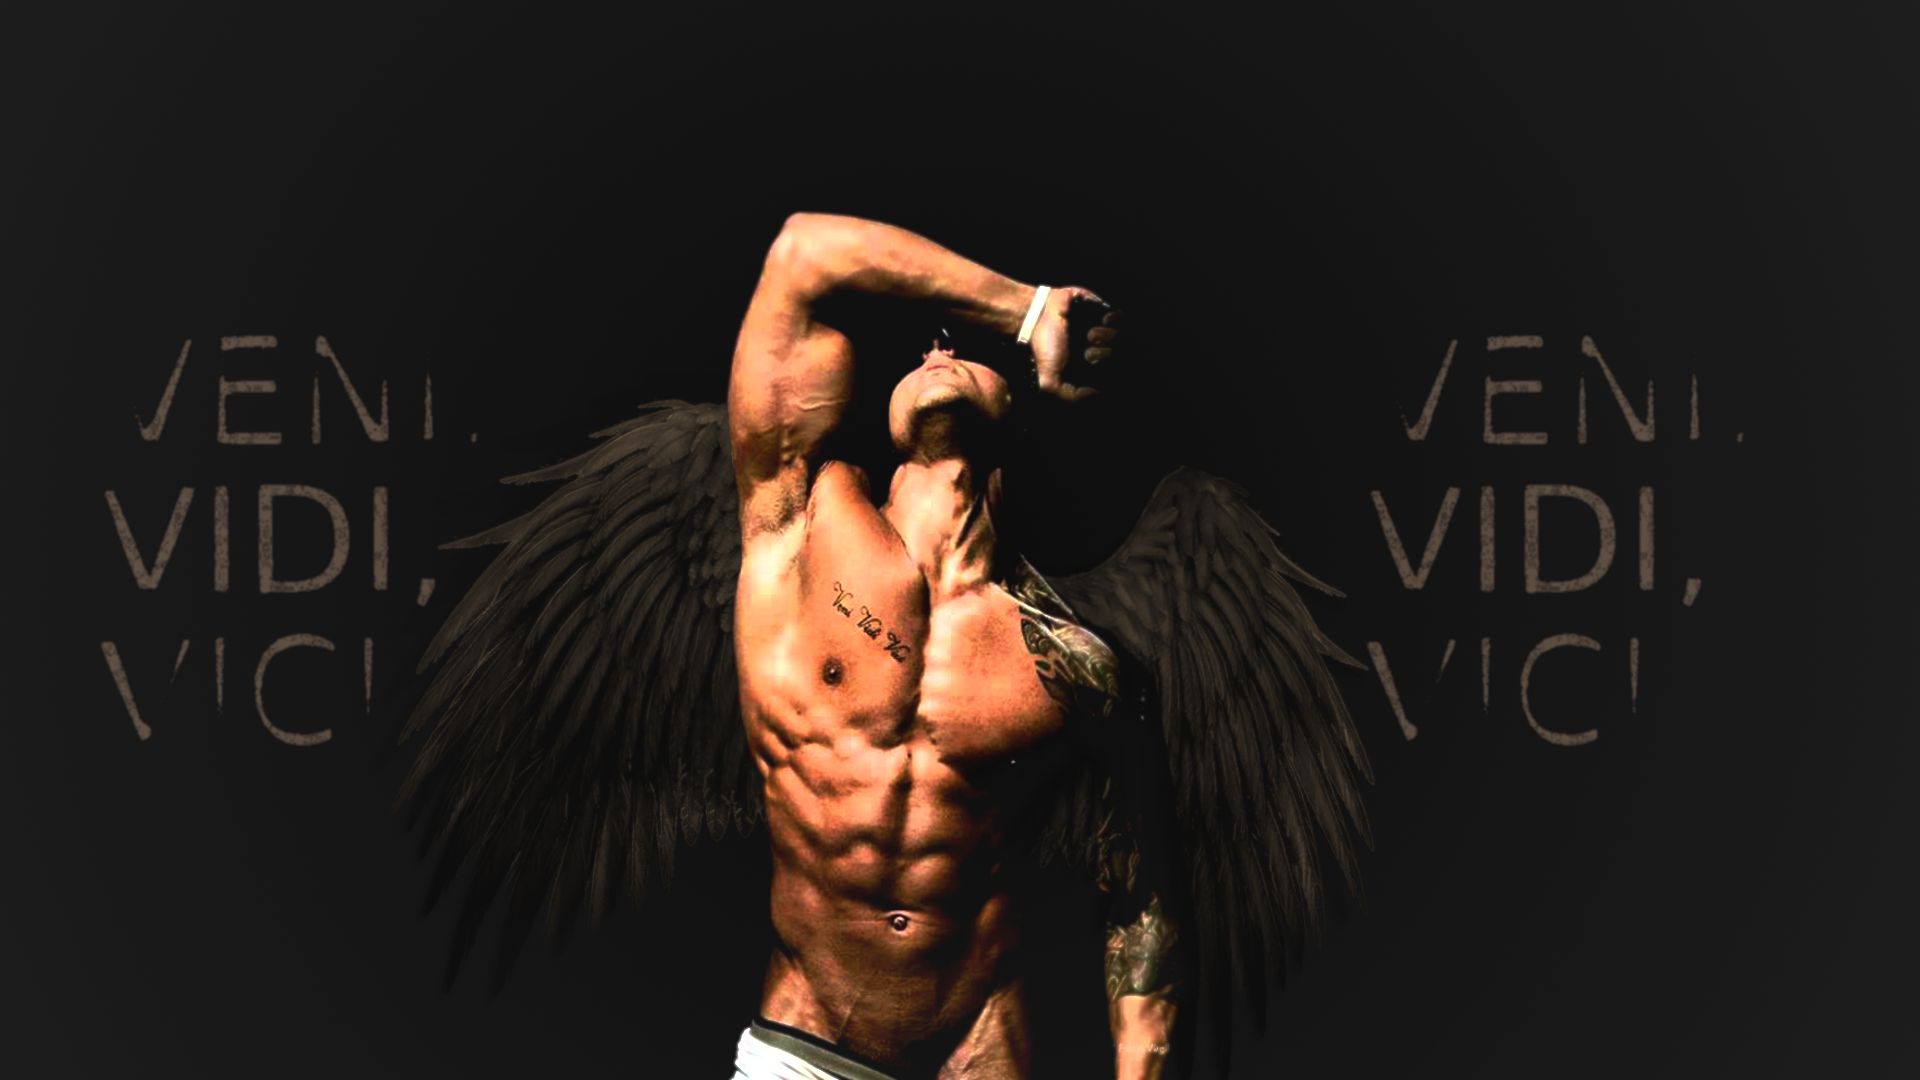 People 1920x1080 Zyzz abs men muscles muscular wings simple background model belly inked men black background arms up armpits shirtless